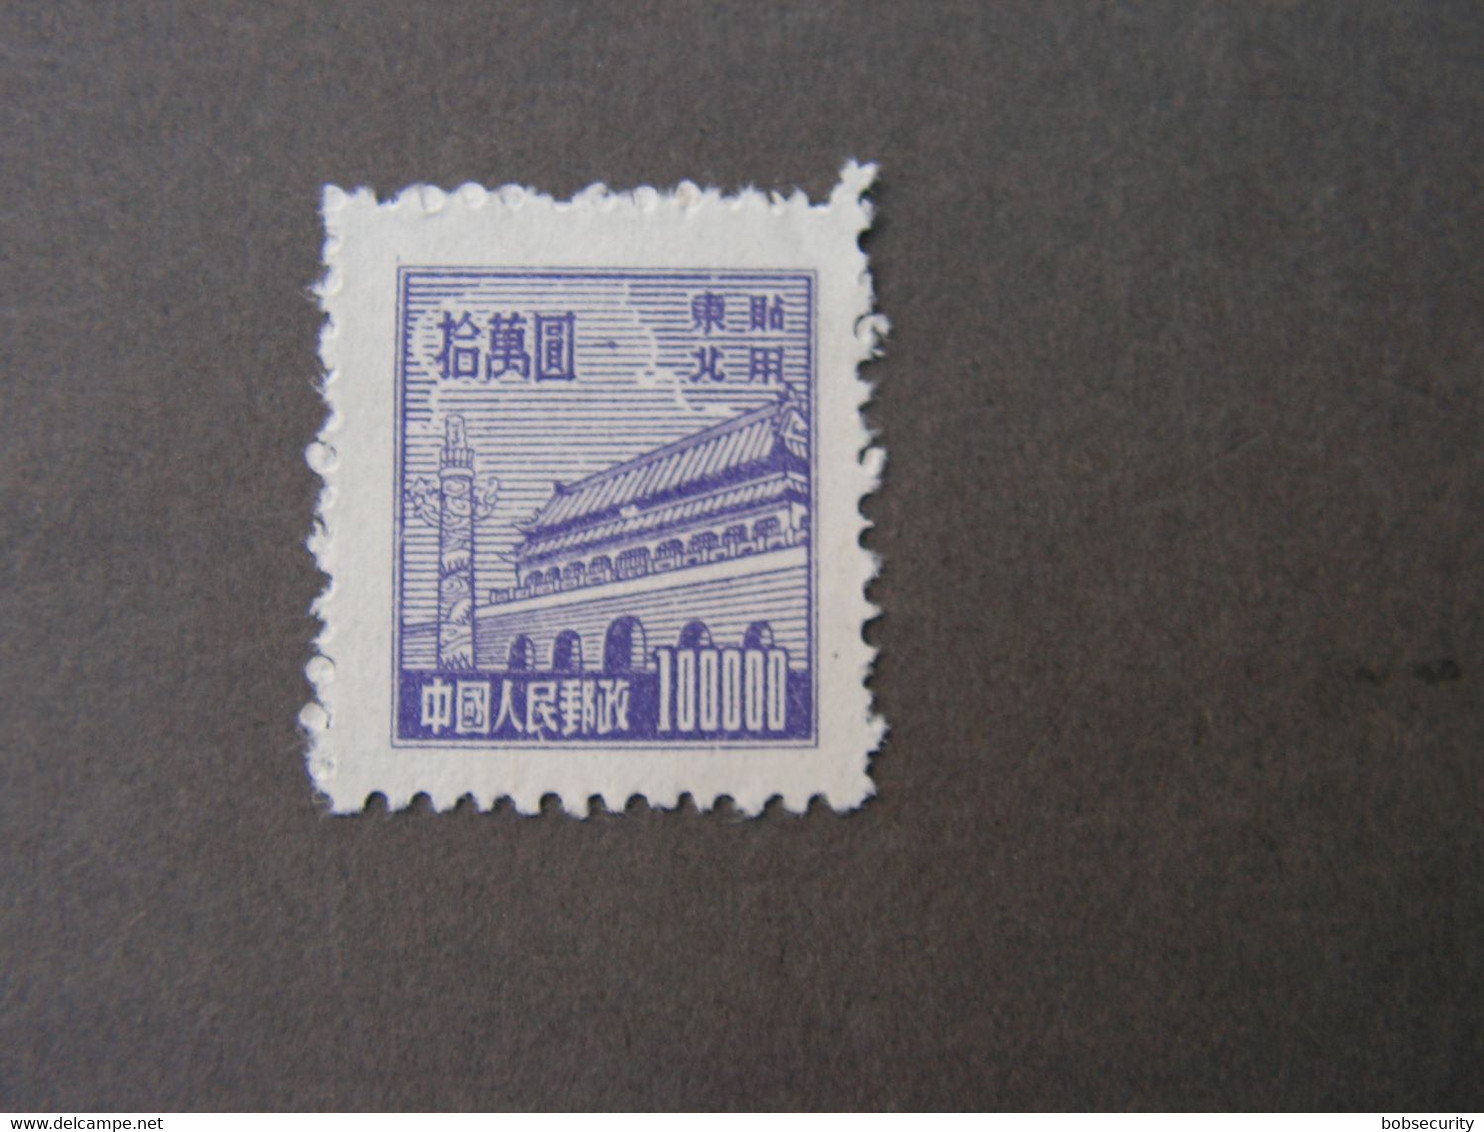 CHINA 1950-51 Nord Ost China   SC# 1L166 , $100,000 - Chine Du Nord-Est 1946-48